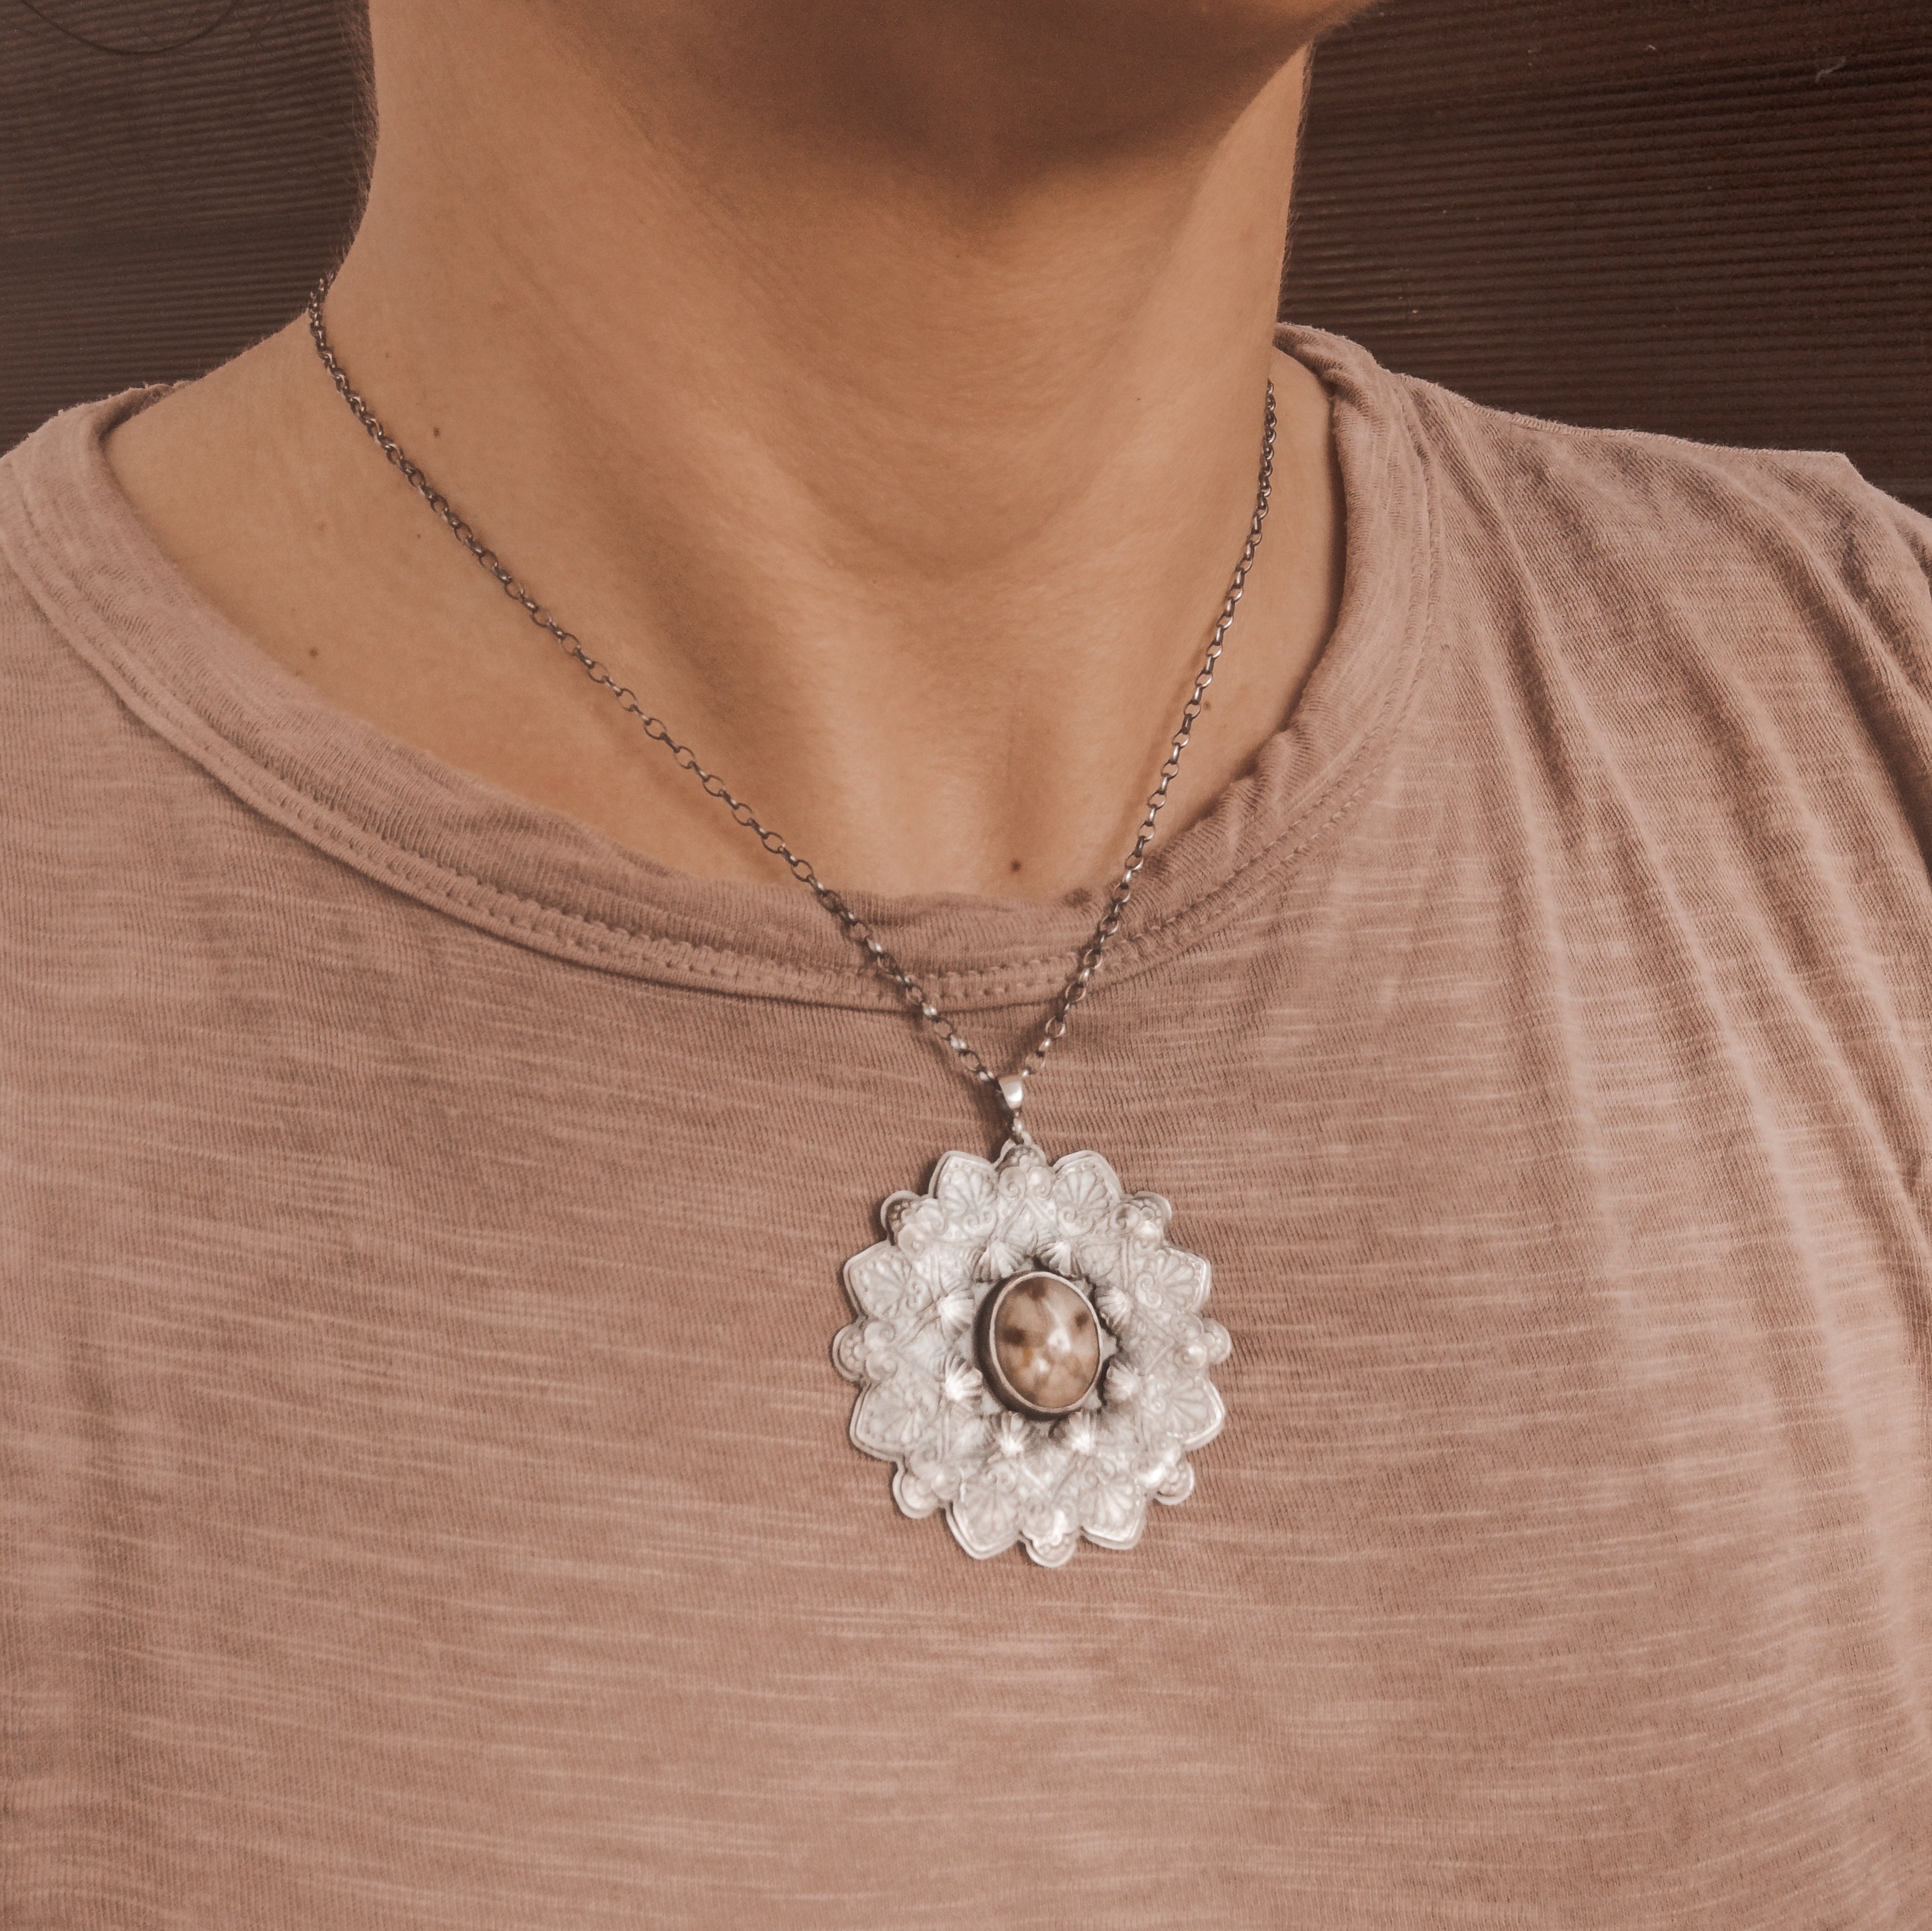 The Large Mandala & Sea Biscuit Necklace